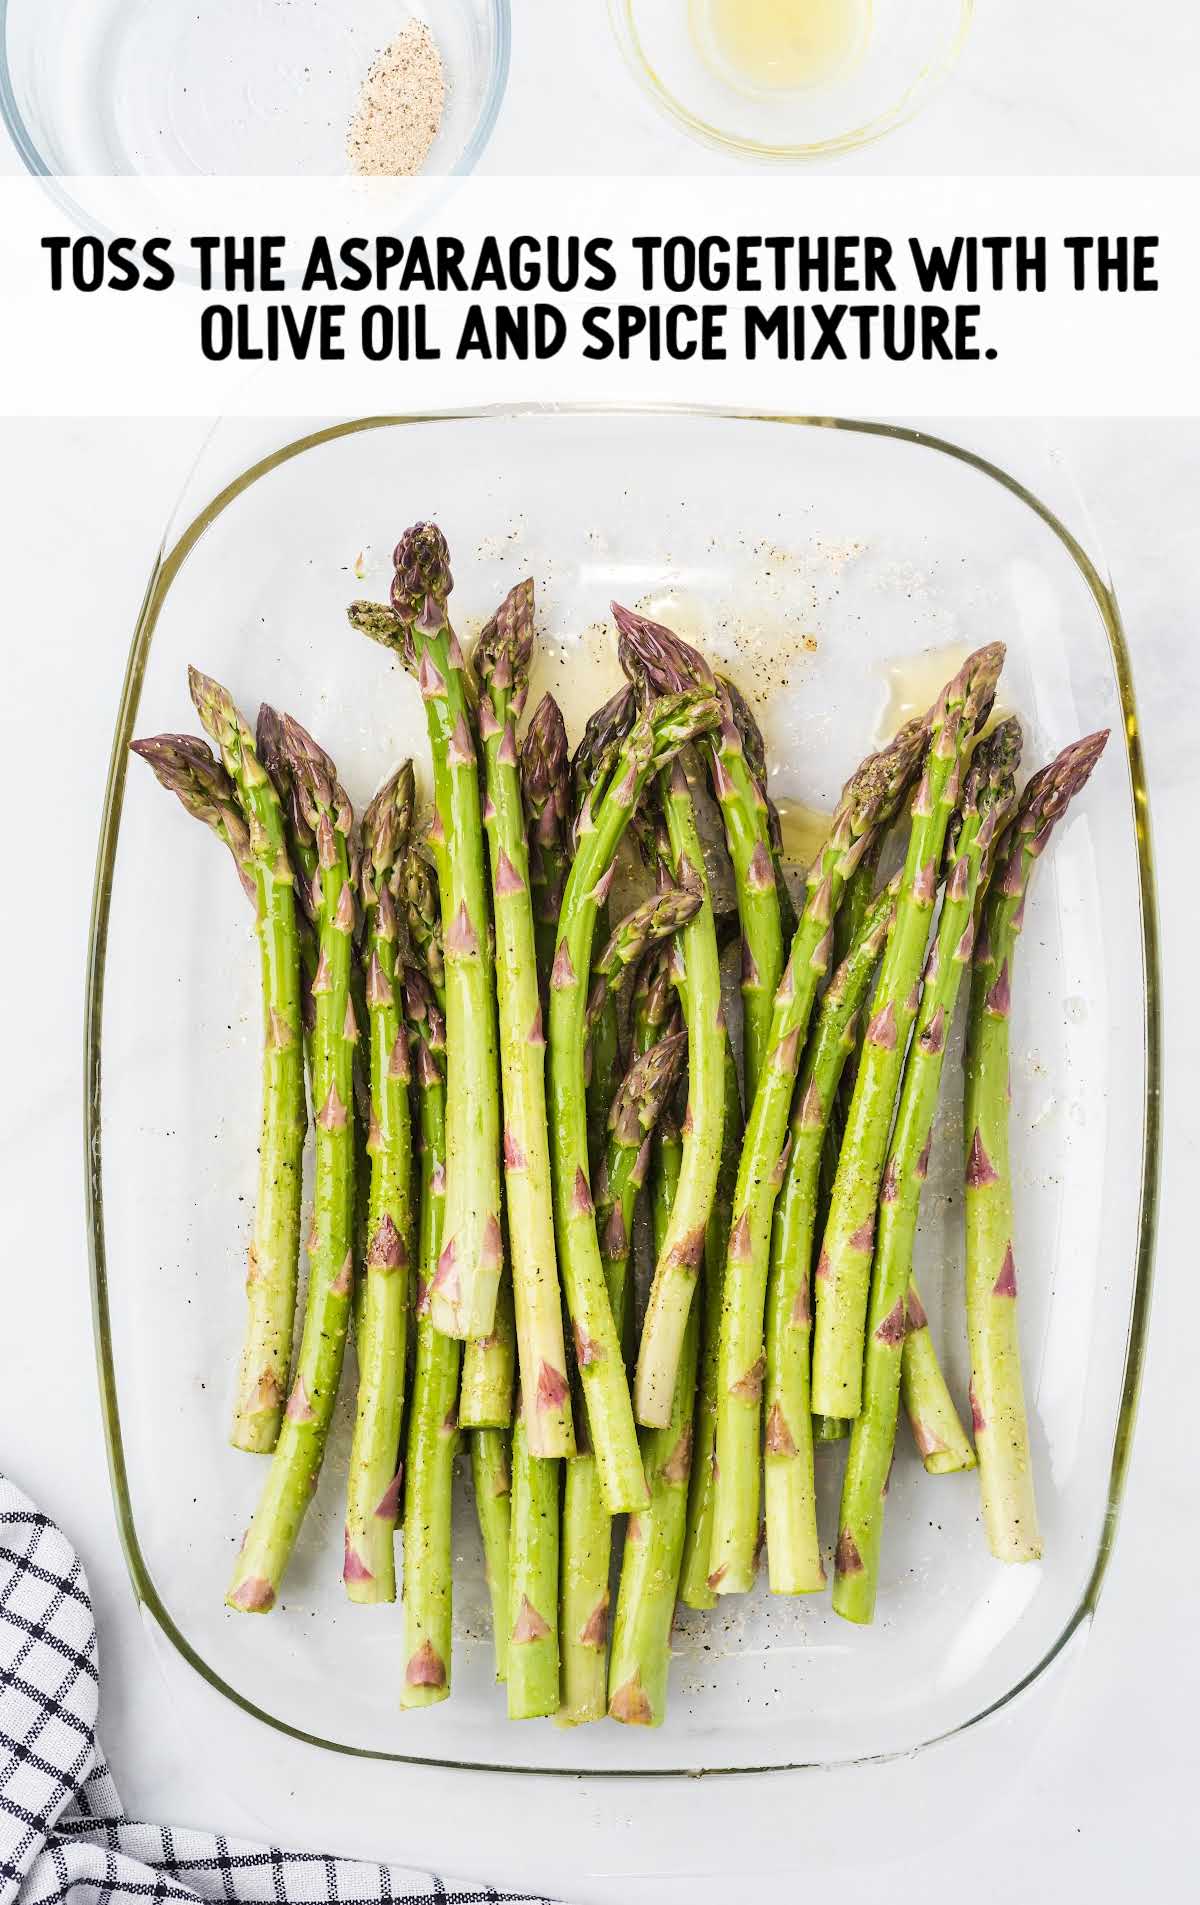 Asparagus tossed together with the olive oil and spice mixture